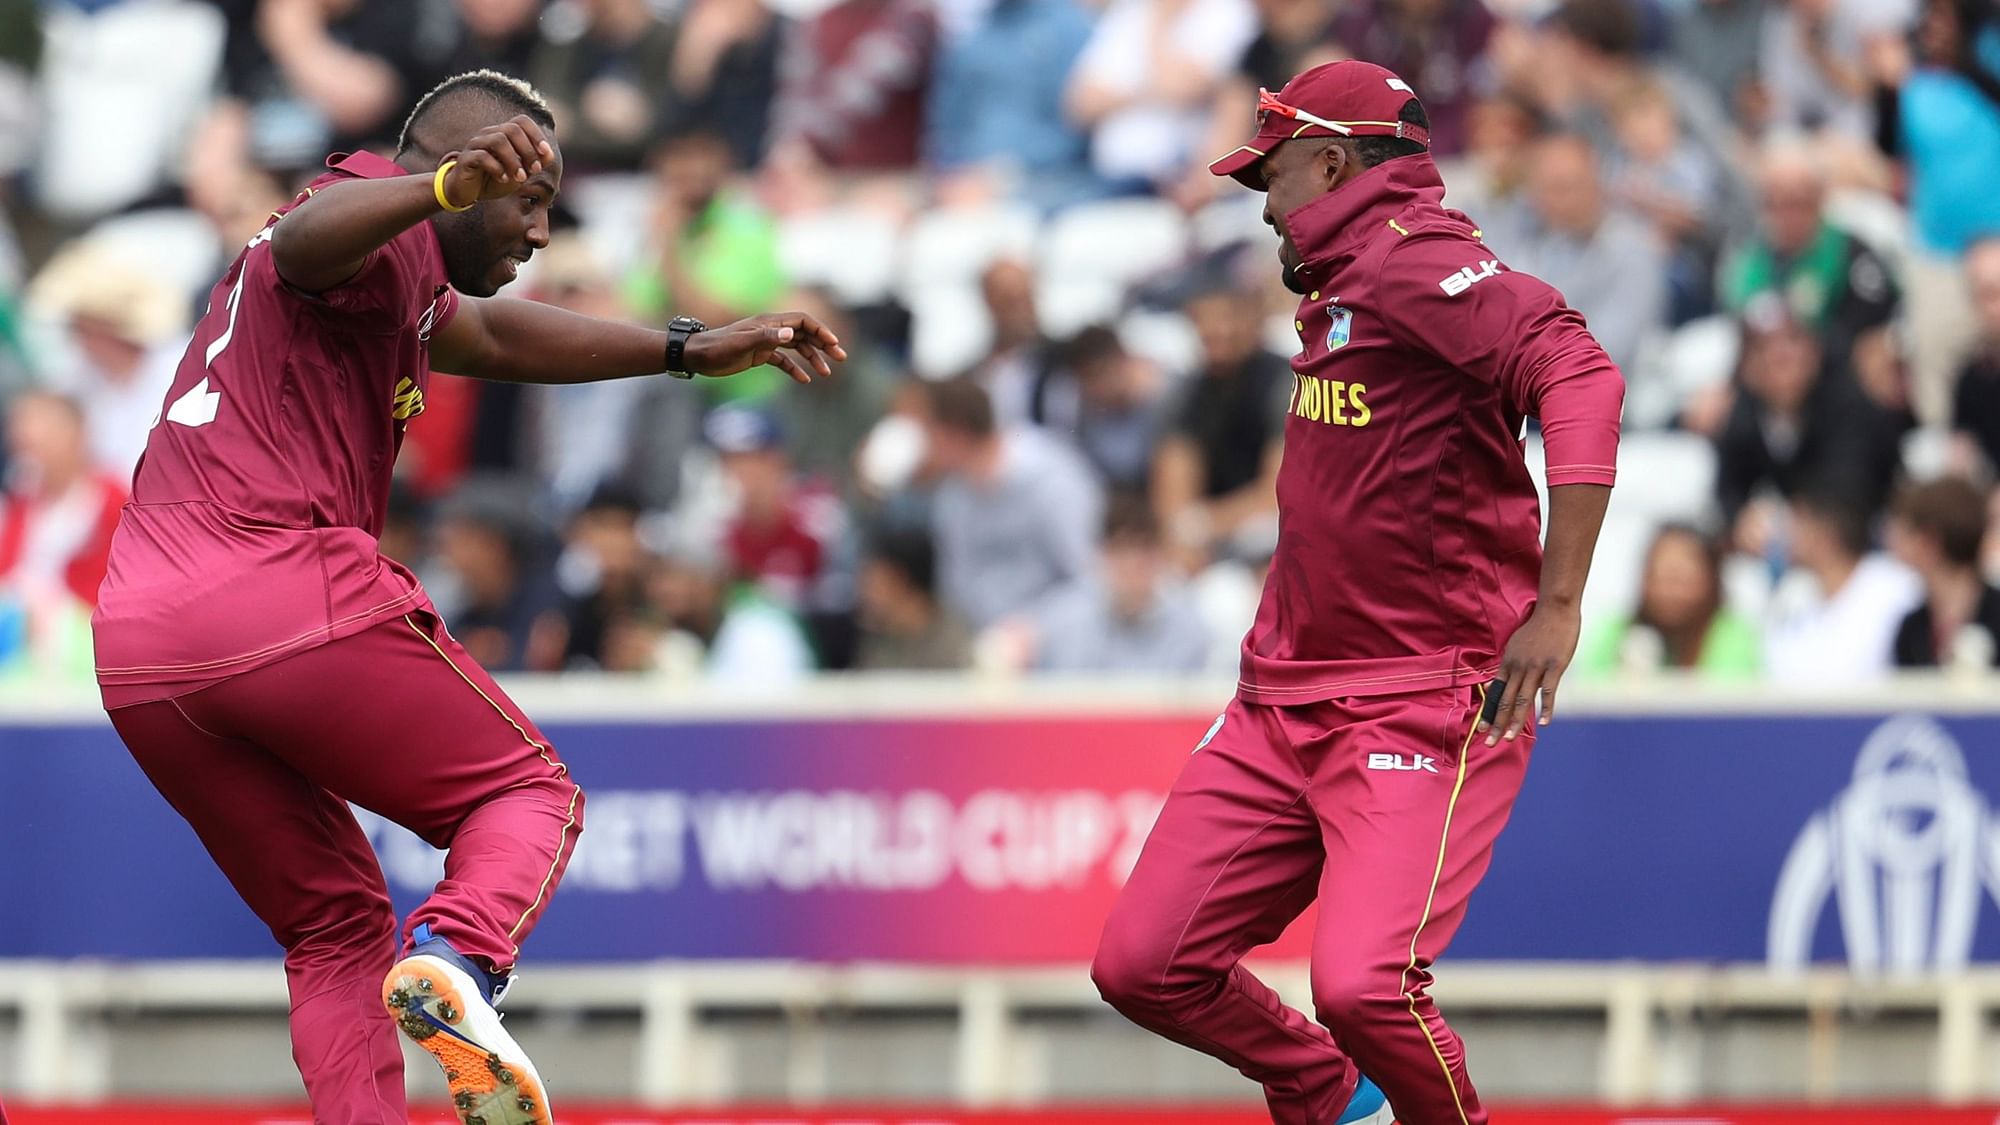 The current West Indies team is not laggard and has the firepower to cause a few upsets in the ongoing ICC World Cup, said legendary Clive Lloyd.